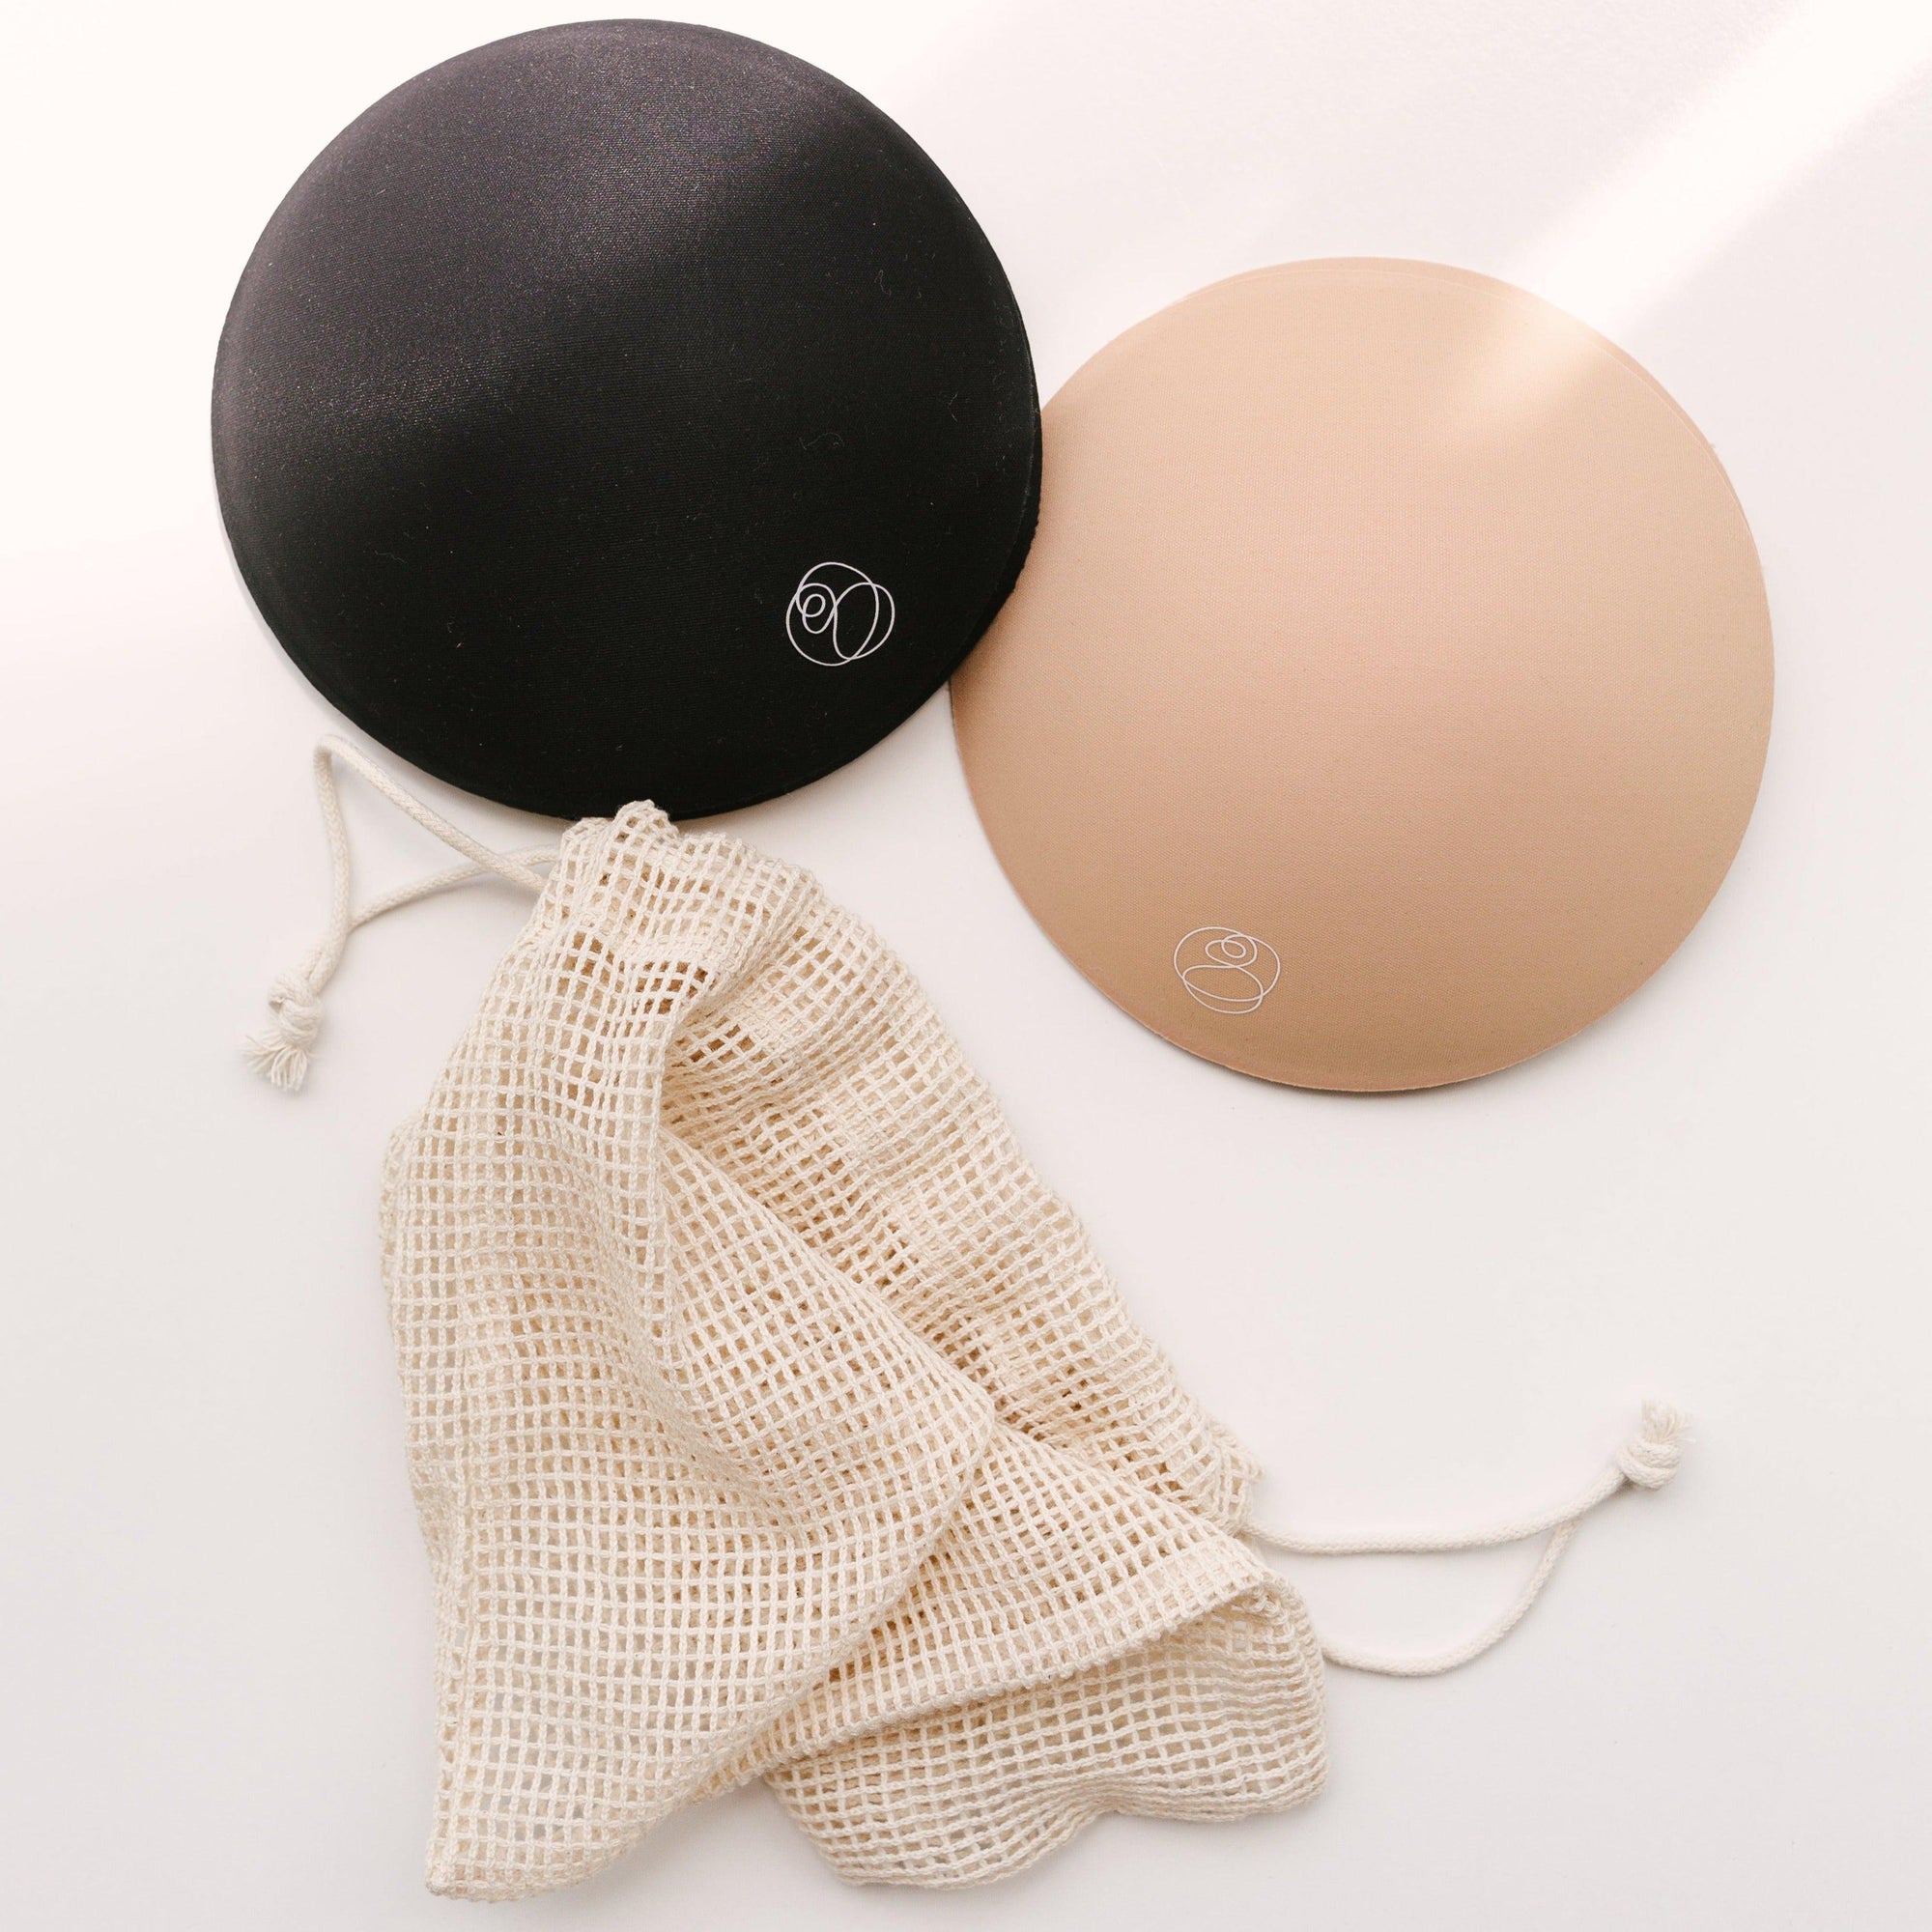 Two black and beige Bare Mum Breast Pads on a white surface.